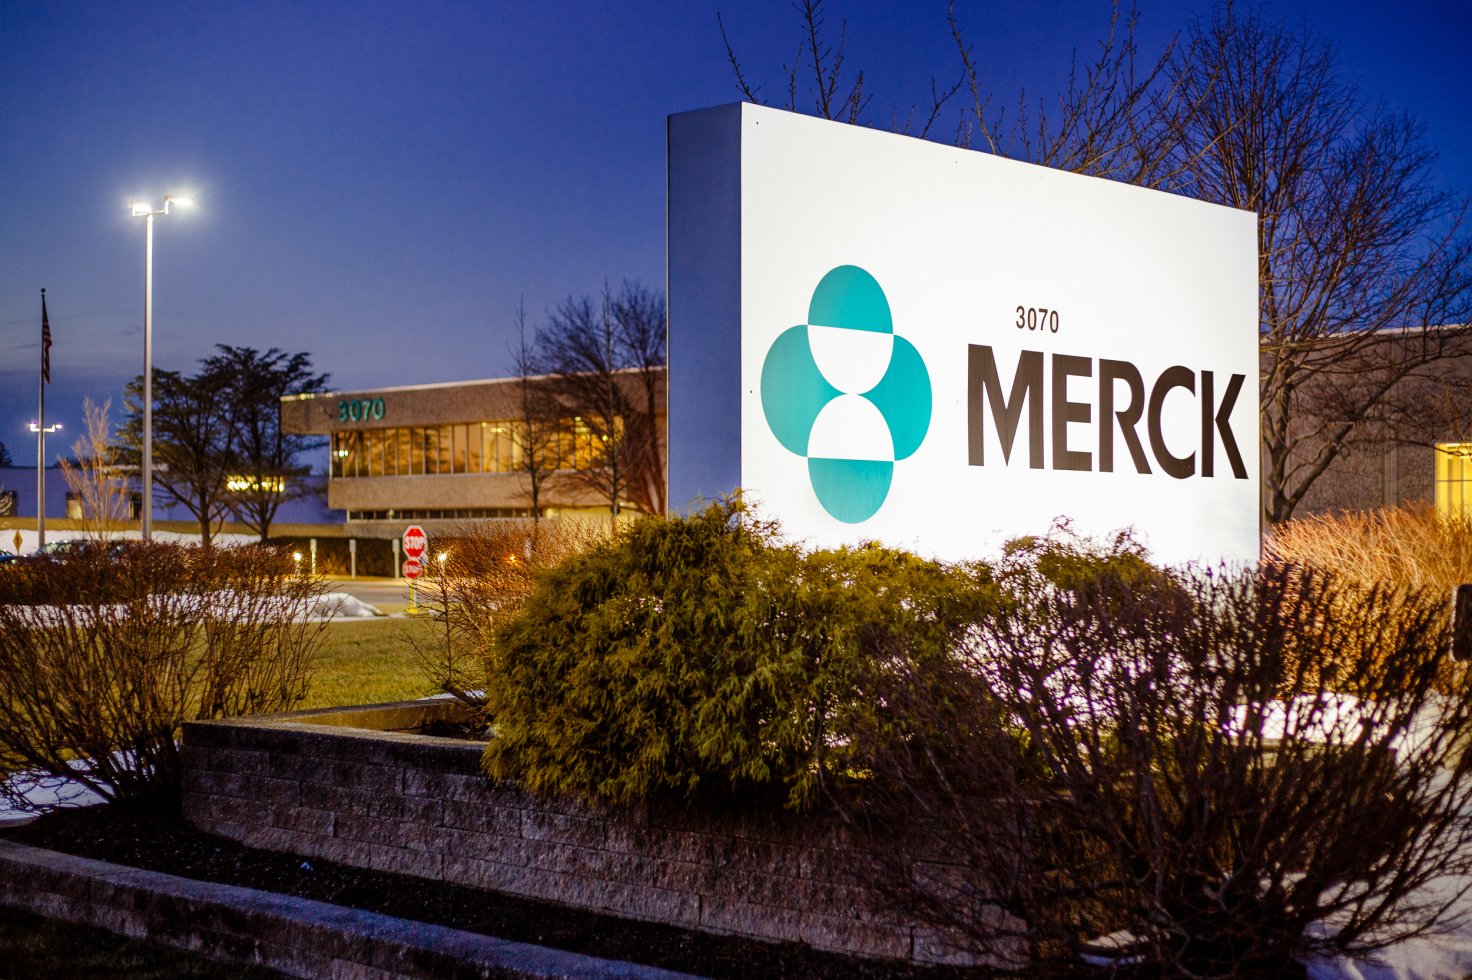 US pharmaceutical group, Merck, is planning to build a £1bn hub in